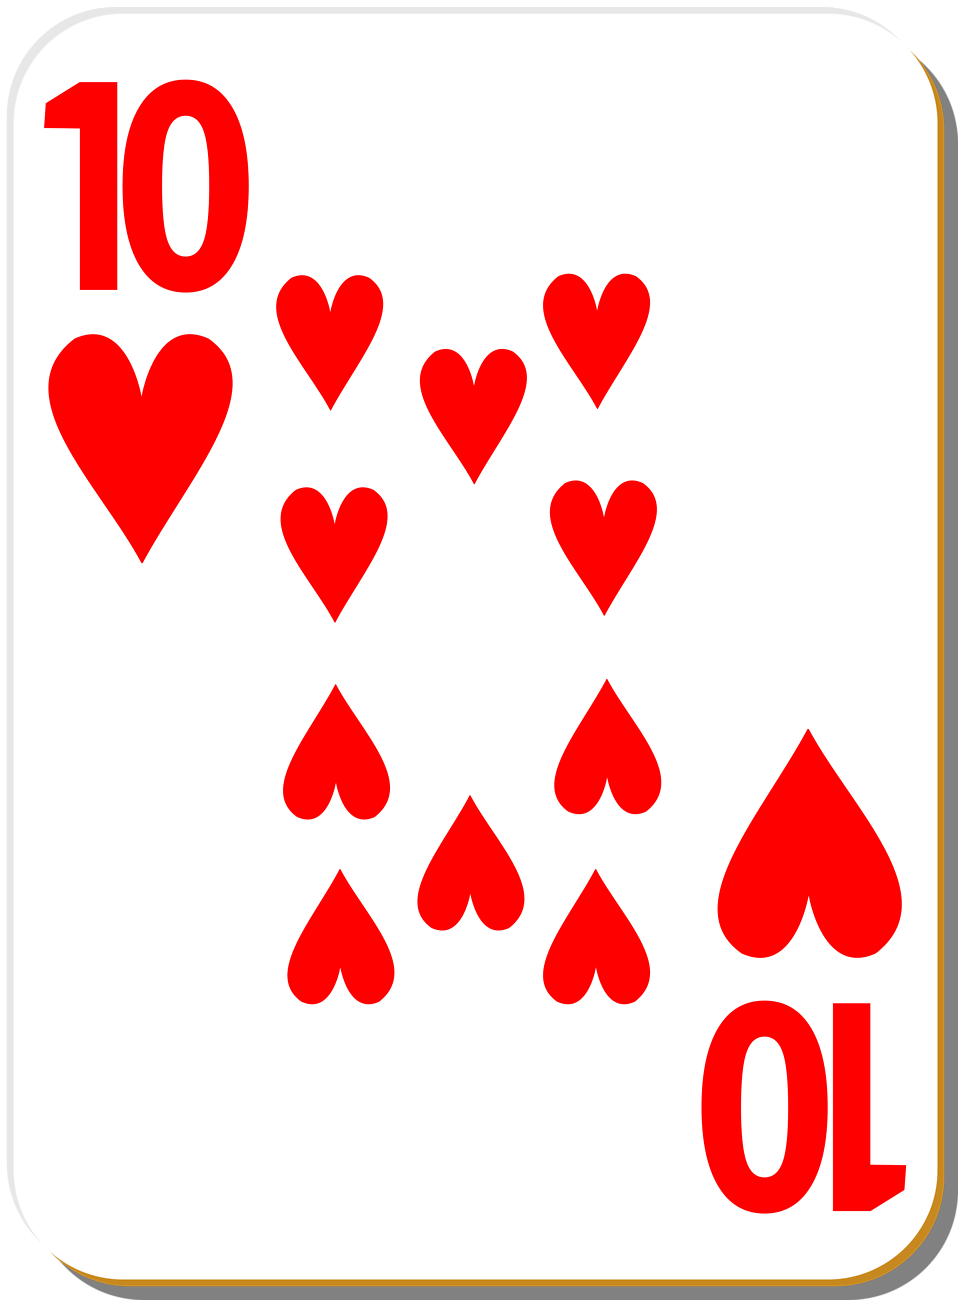 Playing Card   Free Stock Photo   Illustration Of A Ten Of Hearts